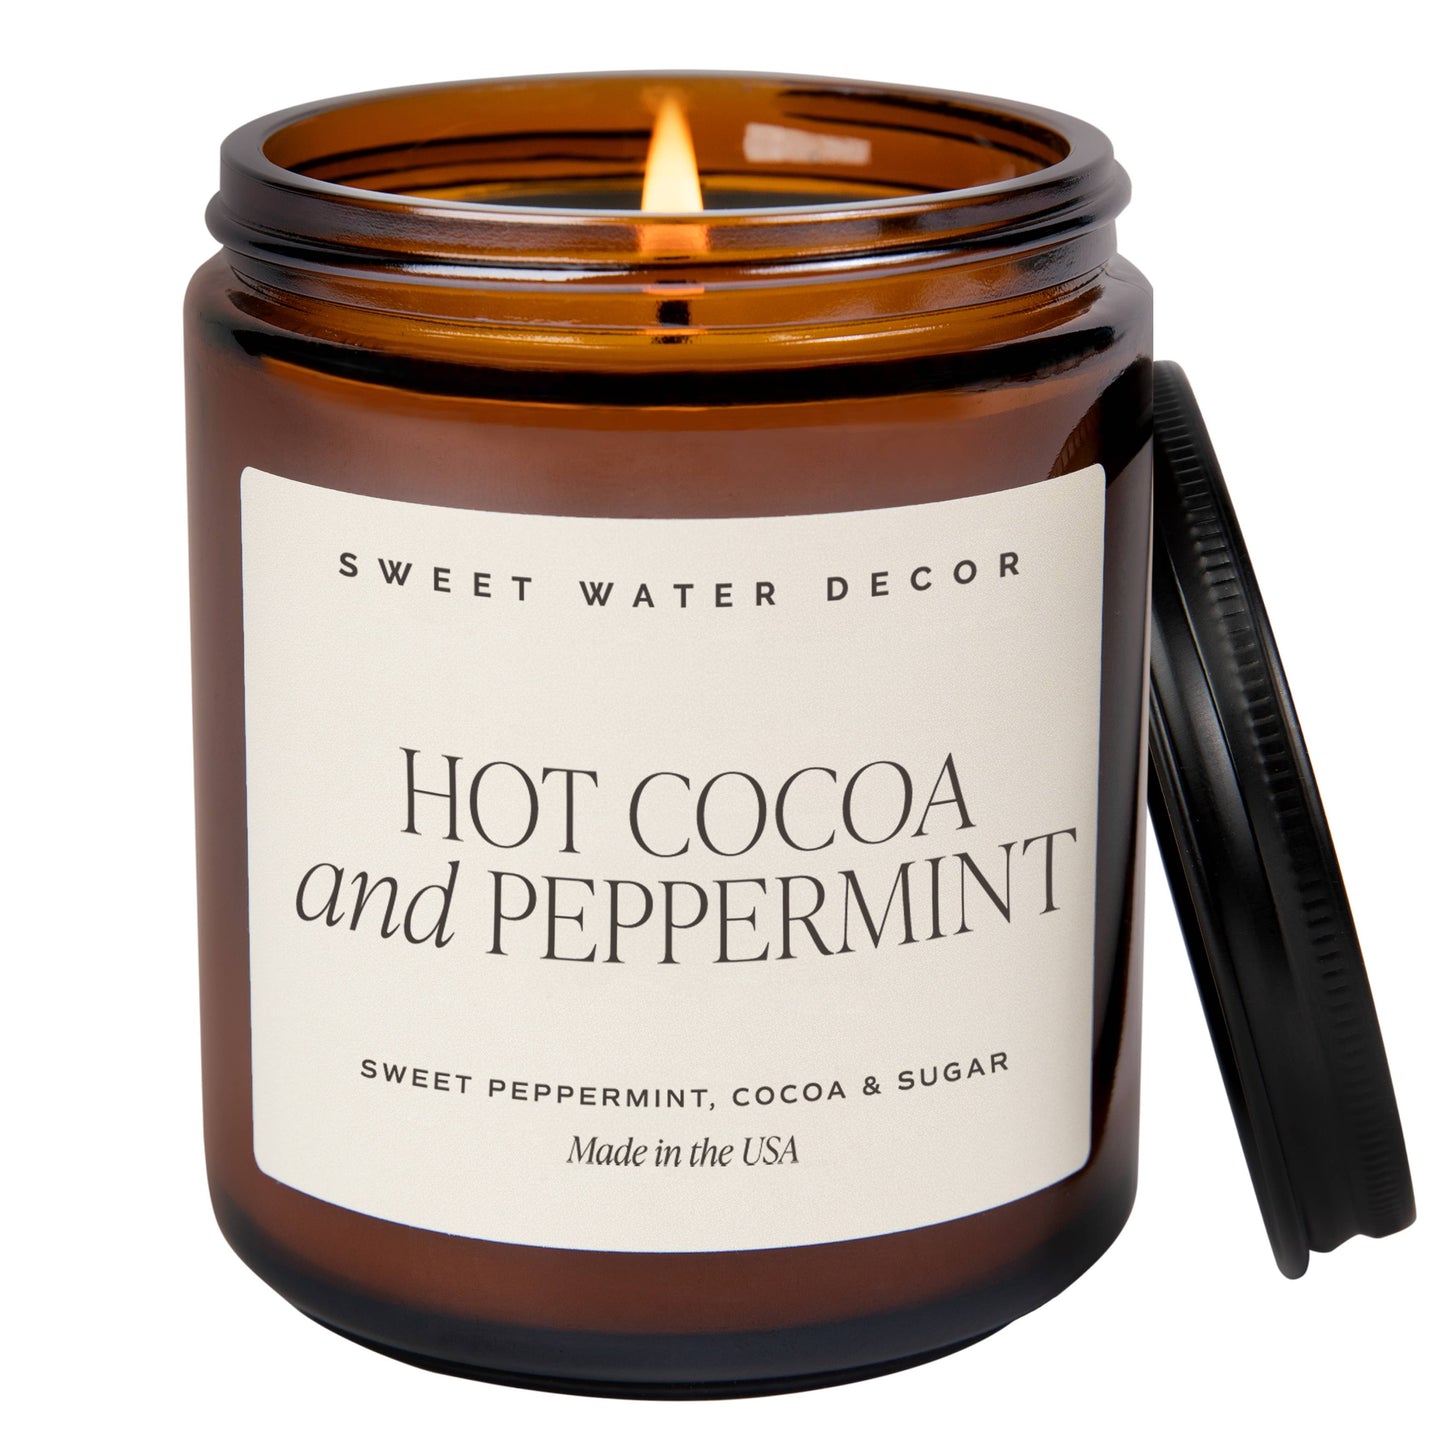 Hot Cocoa and Peppermint 9 oz Soy Candle - Home Decor, Gifts